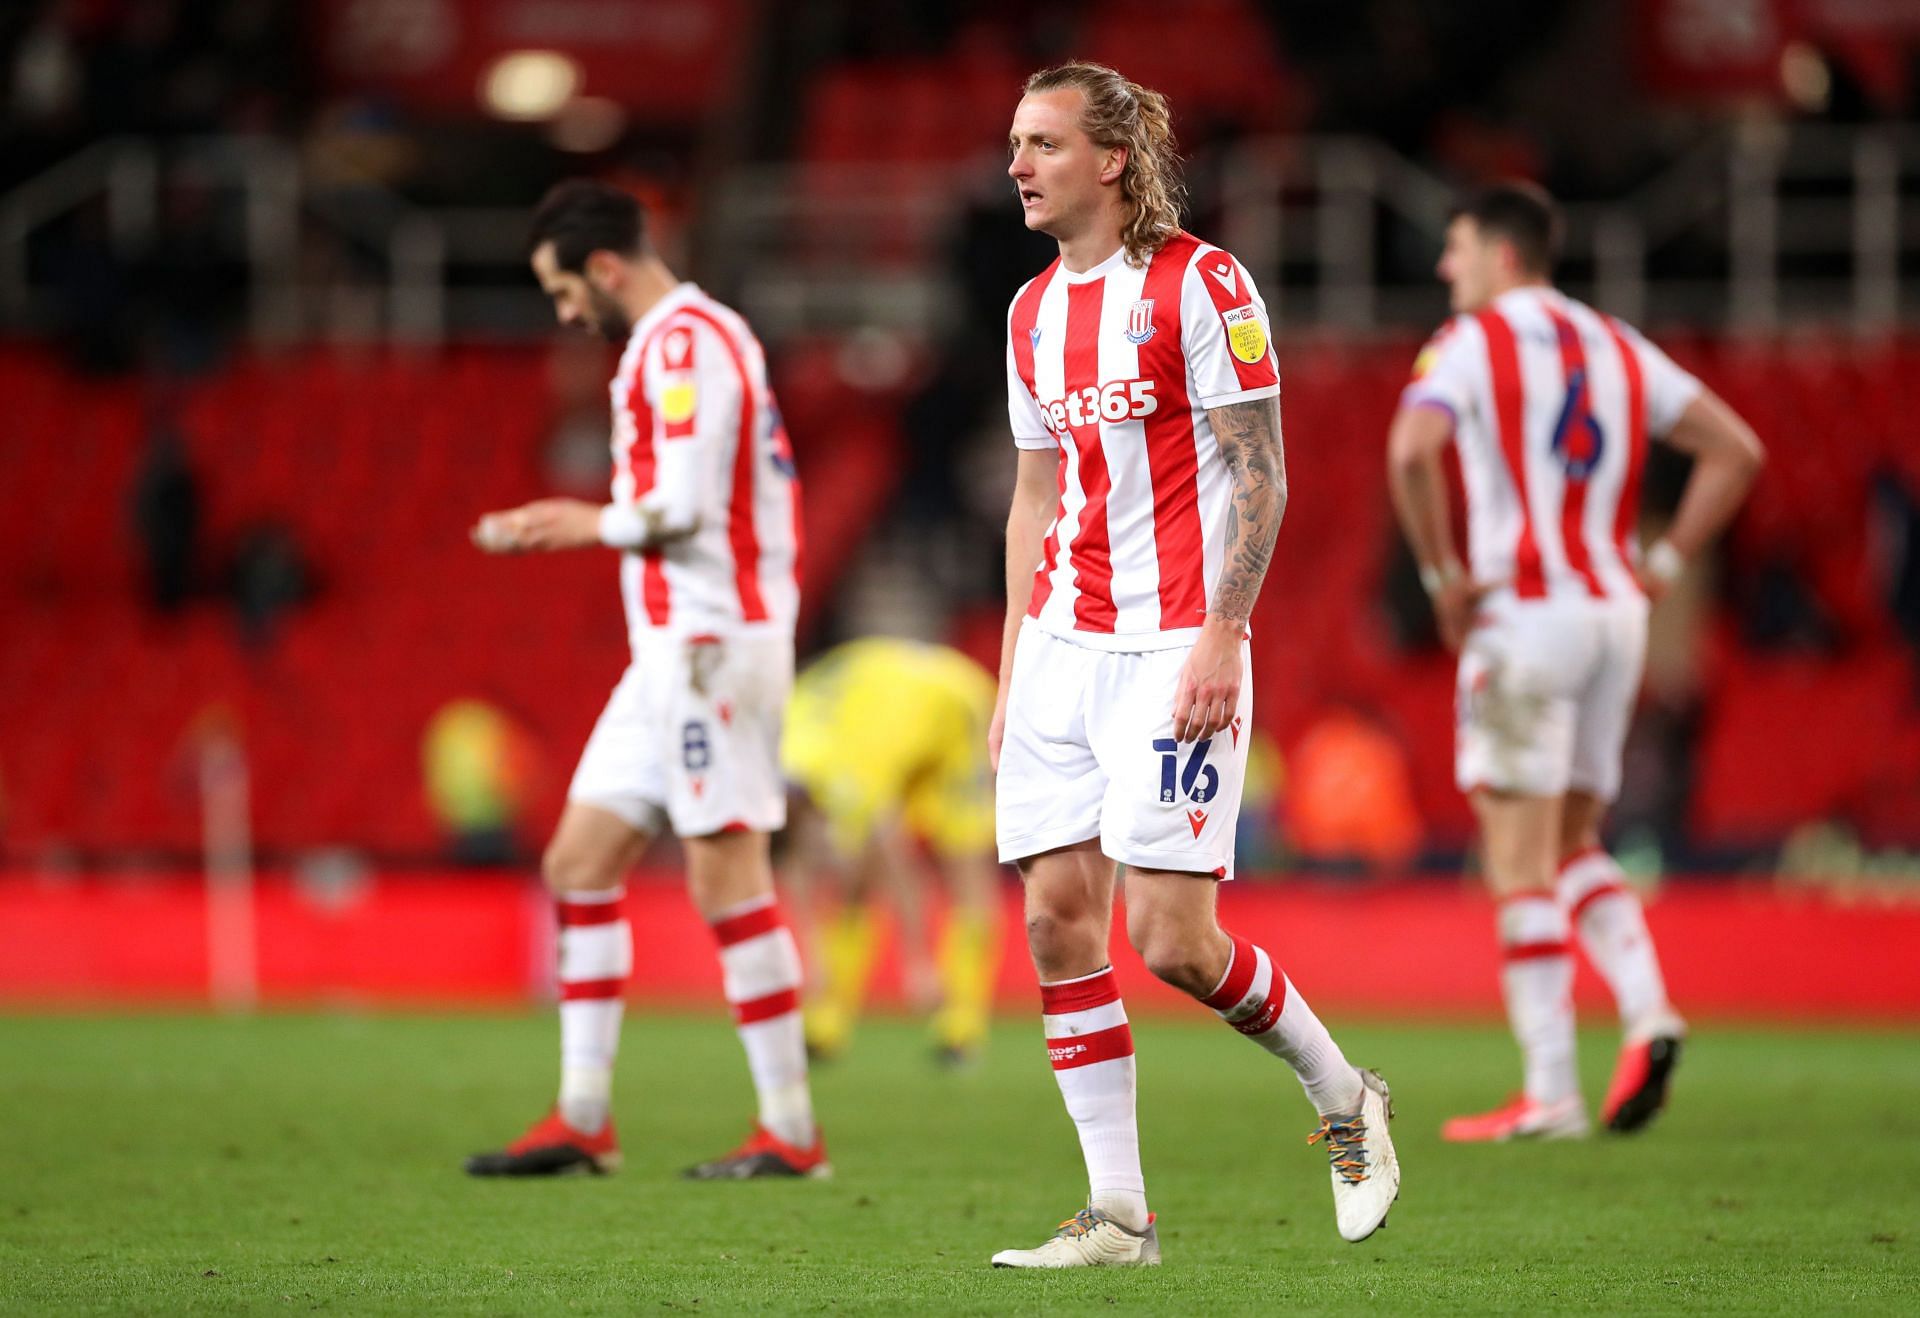 Stoke City will look to win the game